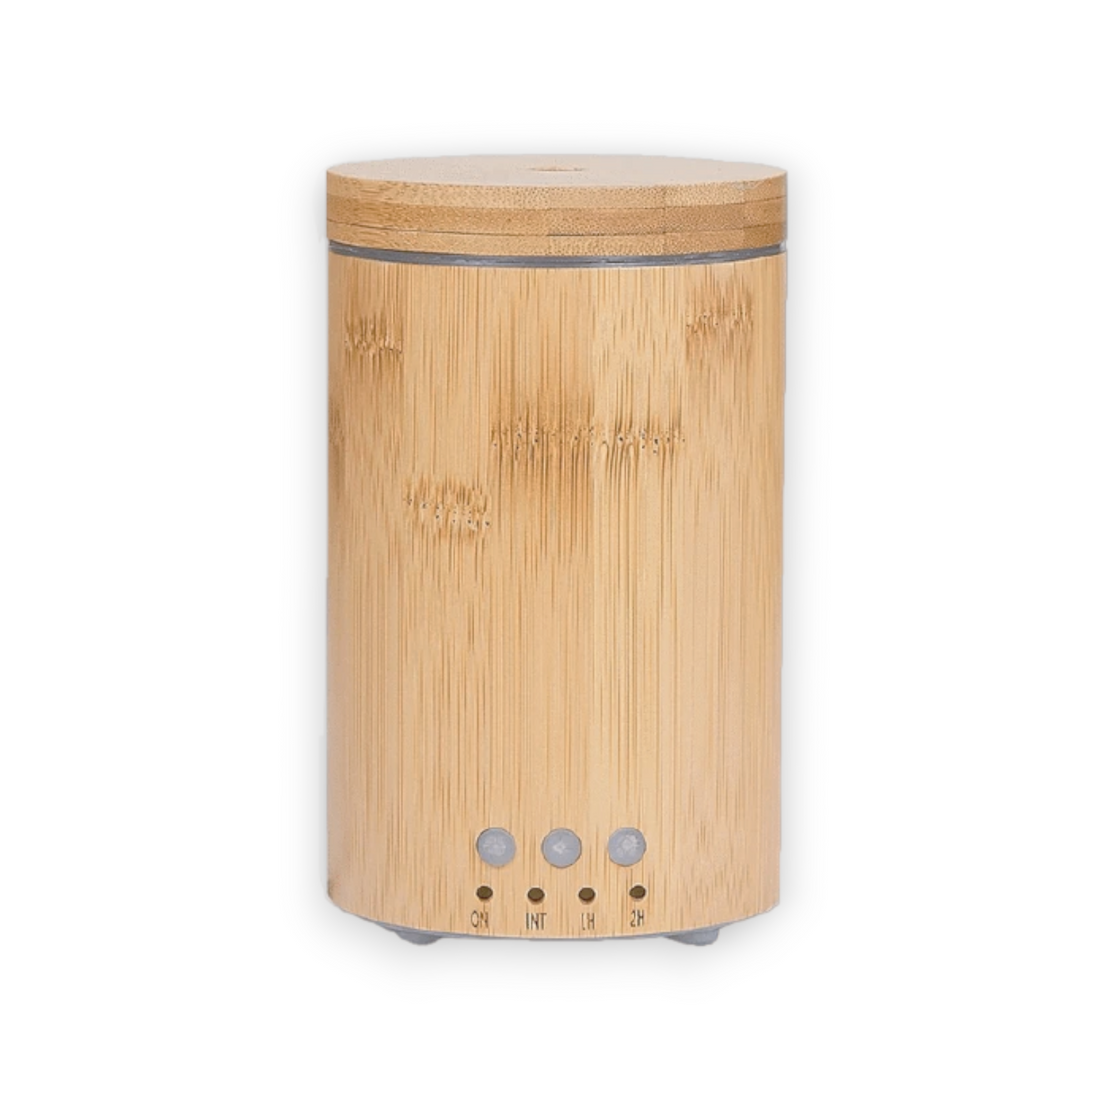 Escentia Bamboo Diffuser emitting a gentle mist, enhancing indoor and outdoor spaces